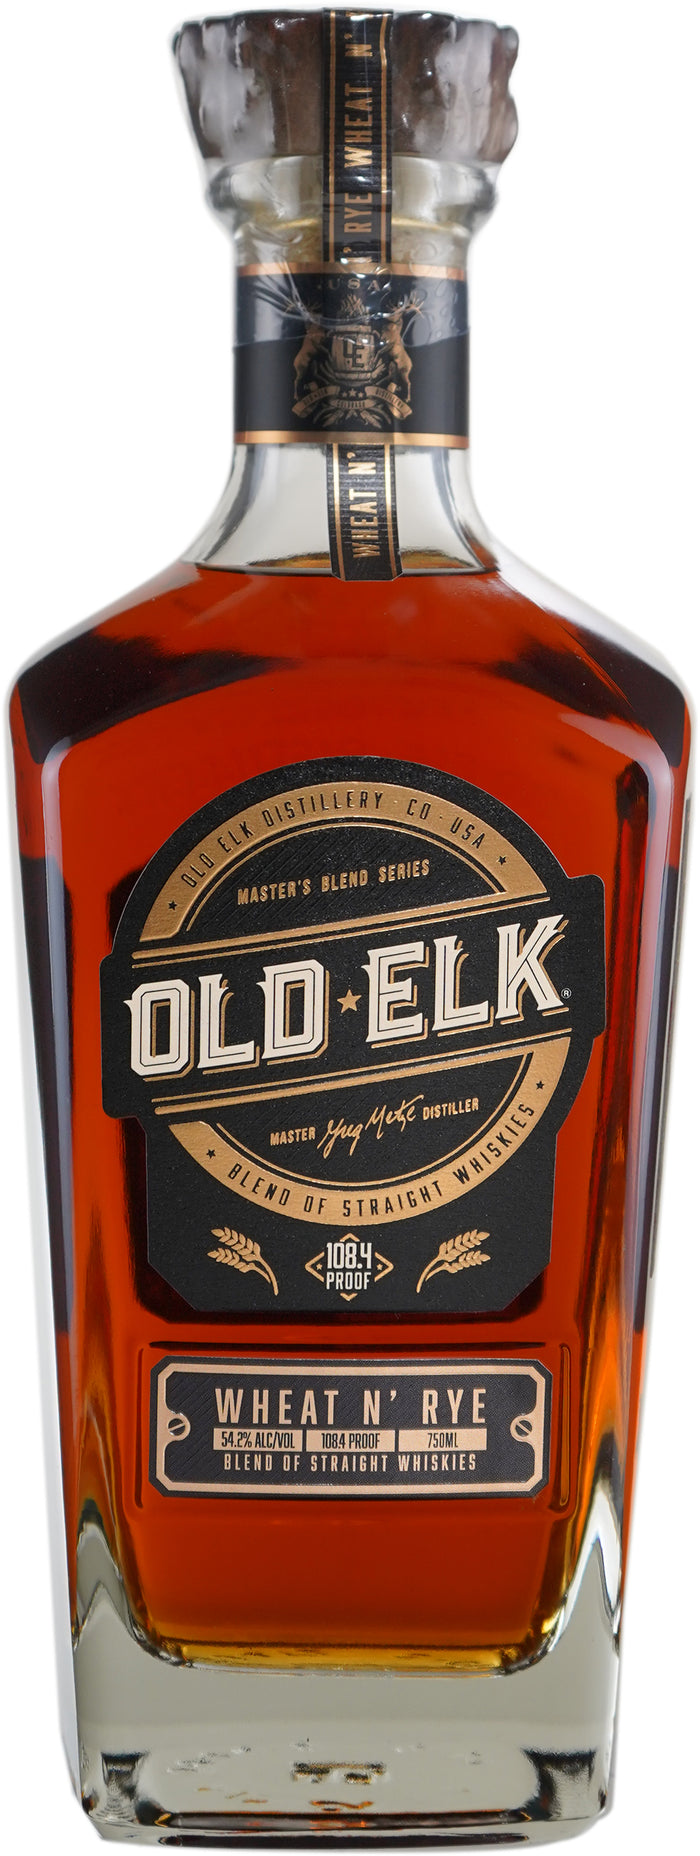 Old Elk Wheat n' Rye Blend Limited Release Straight Whiskey